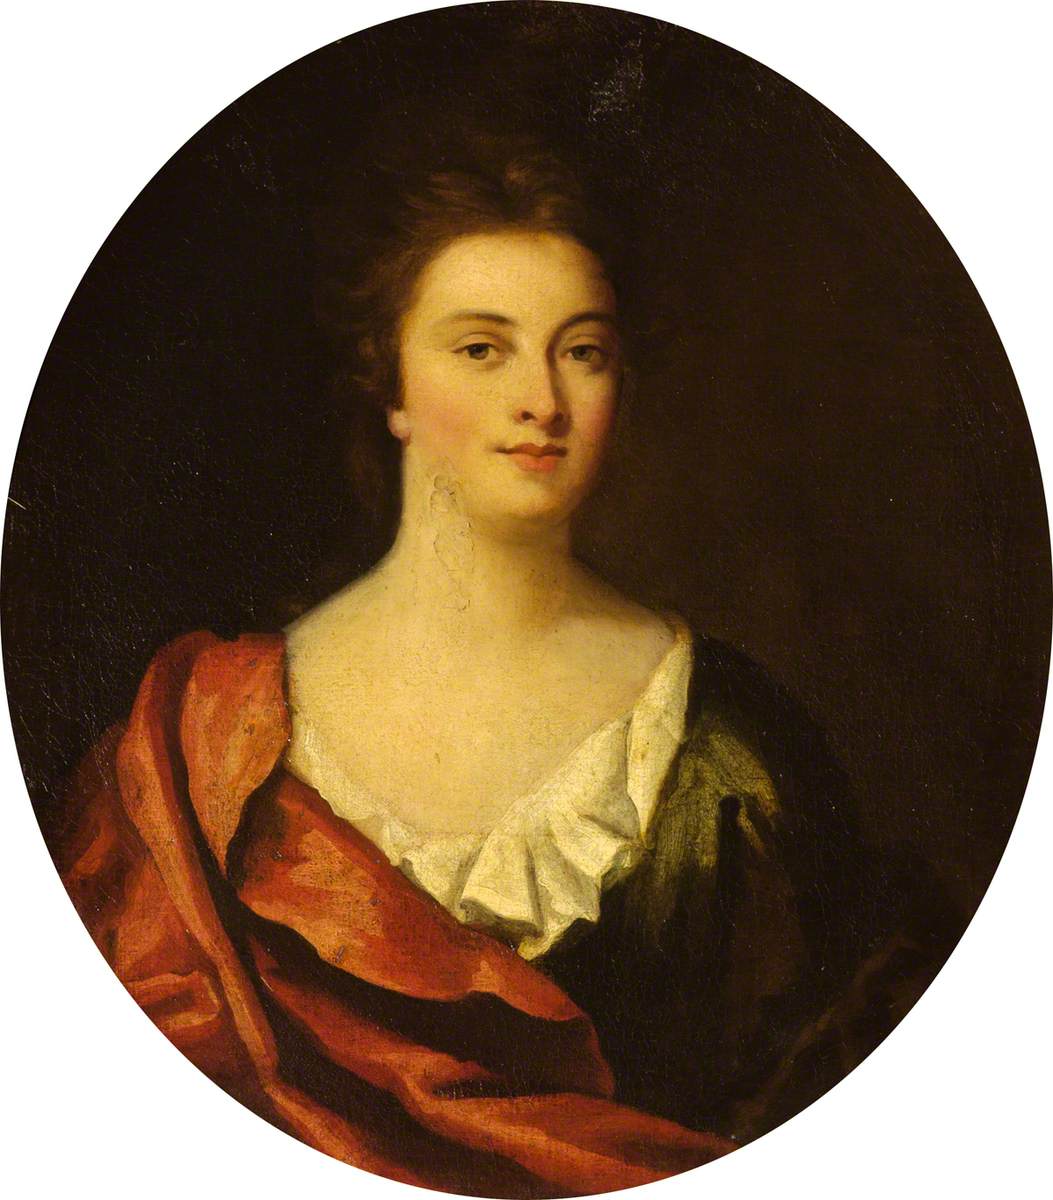 Portrait of a Lady in a Green Dress and a Red Cloak